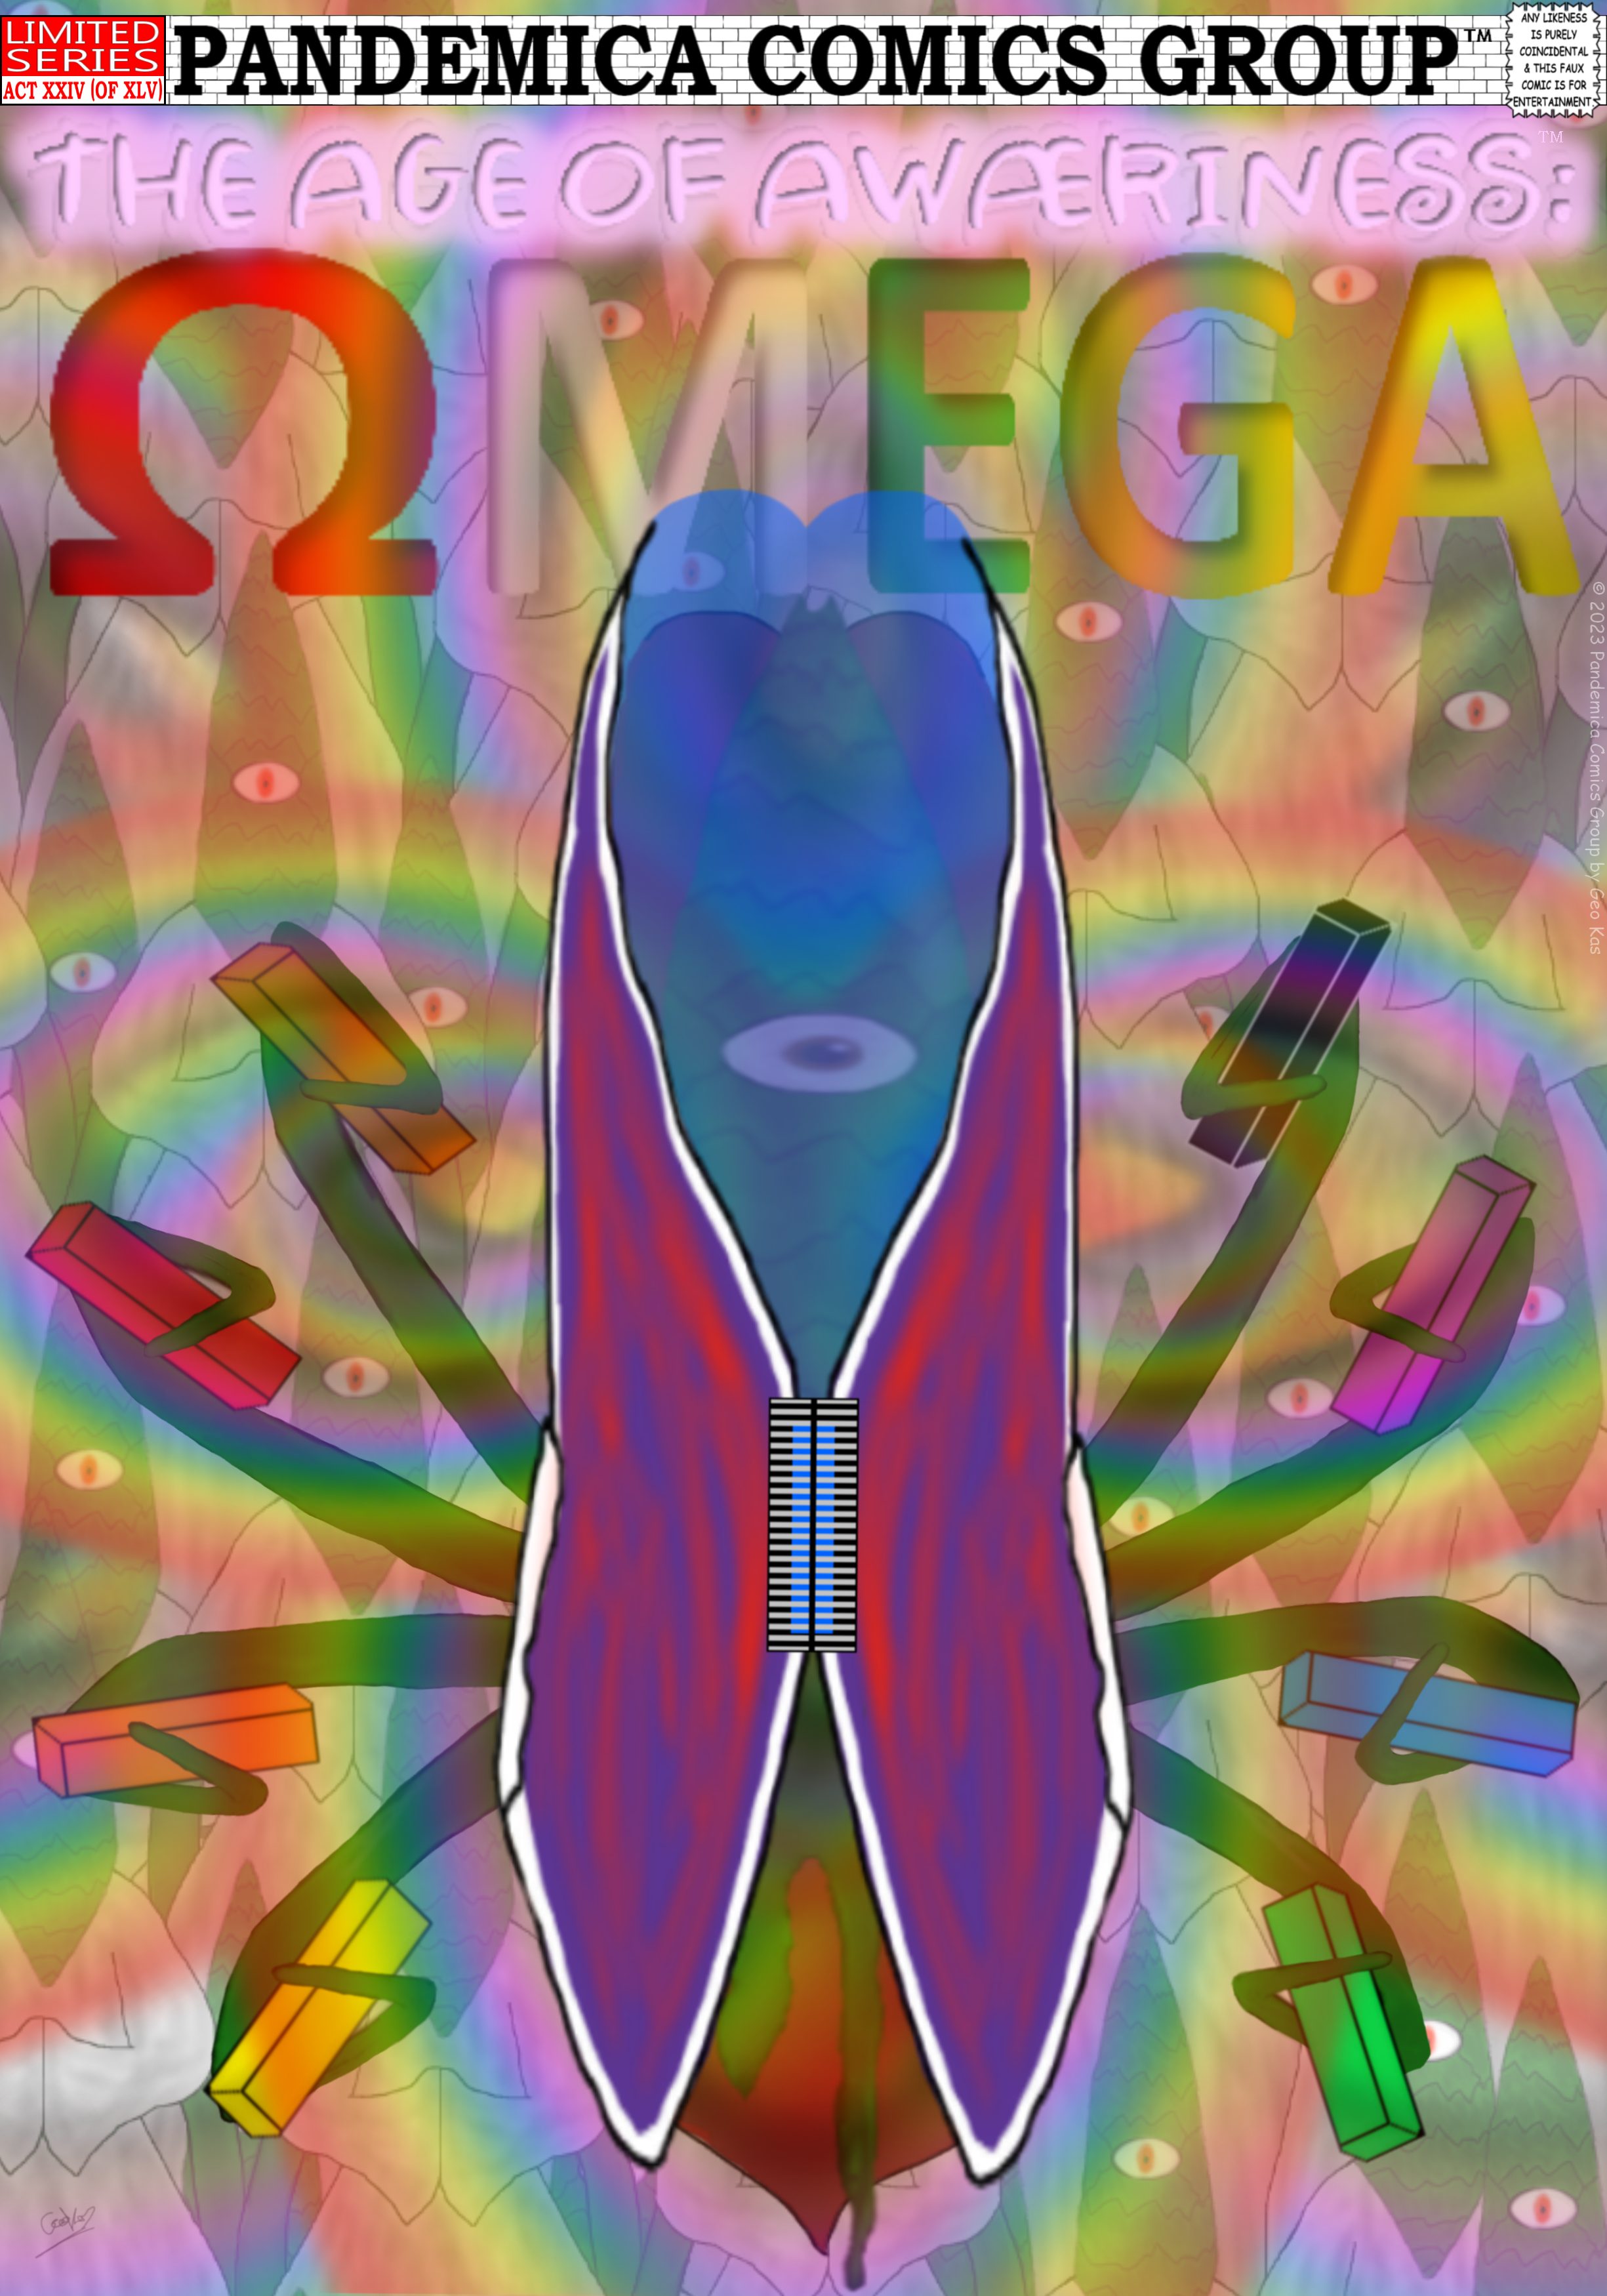 The Age of Awæriness: OMEGA